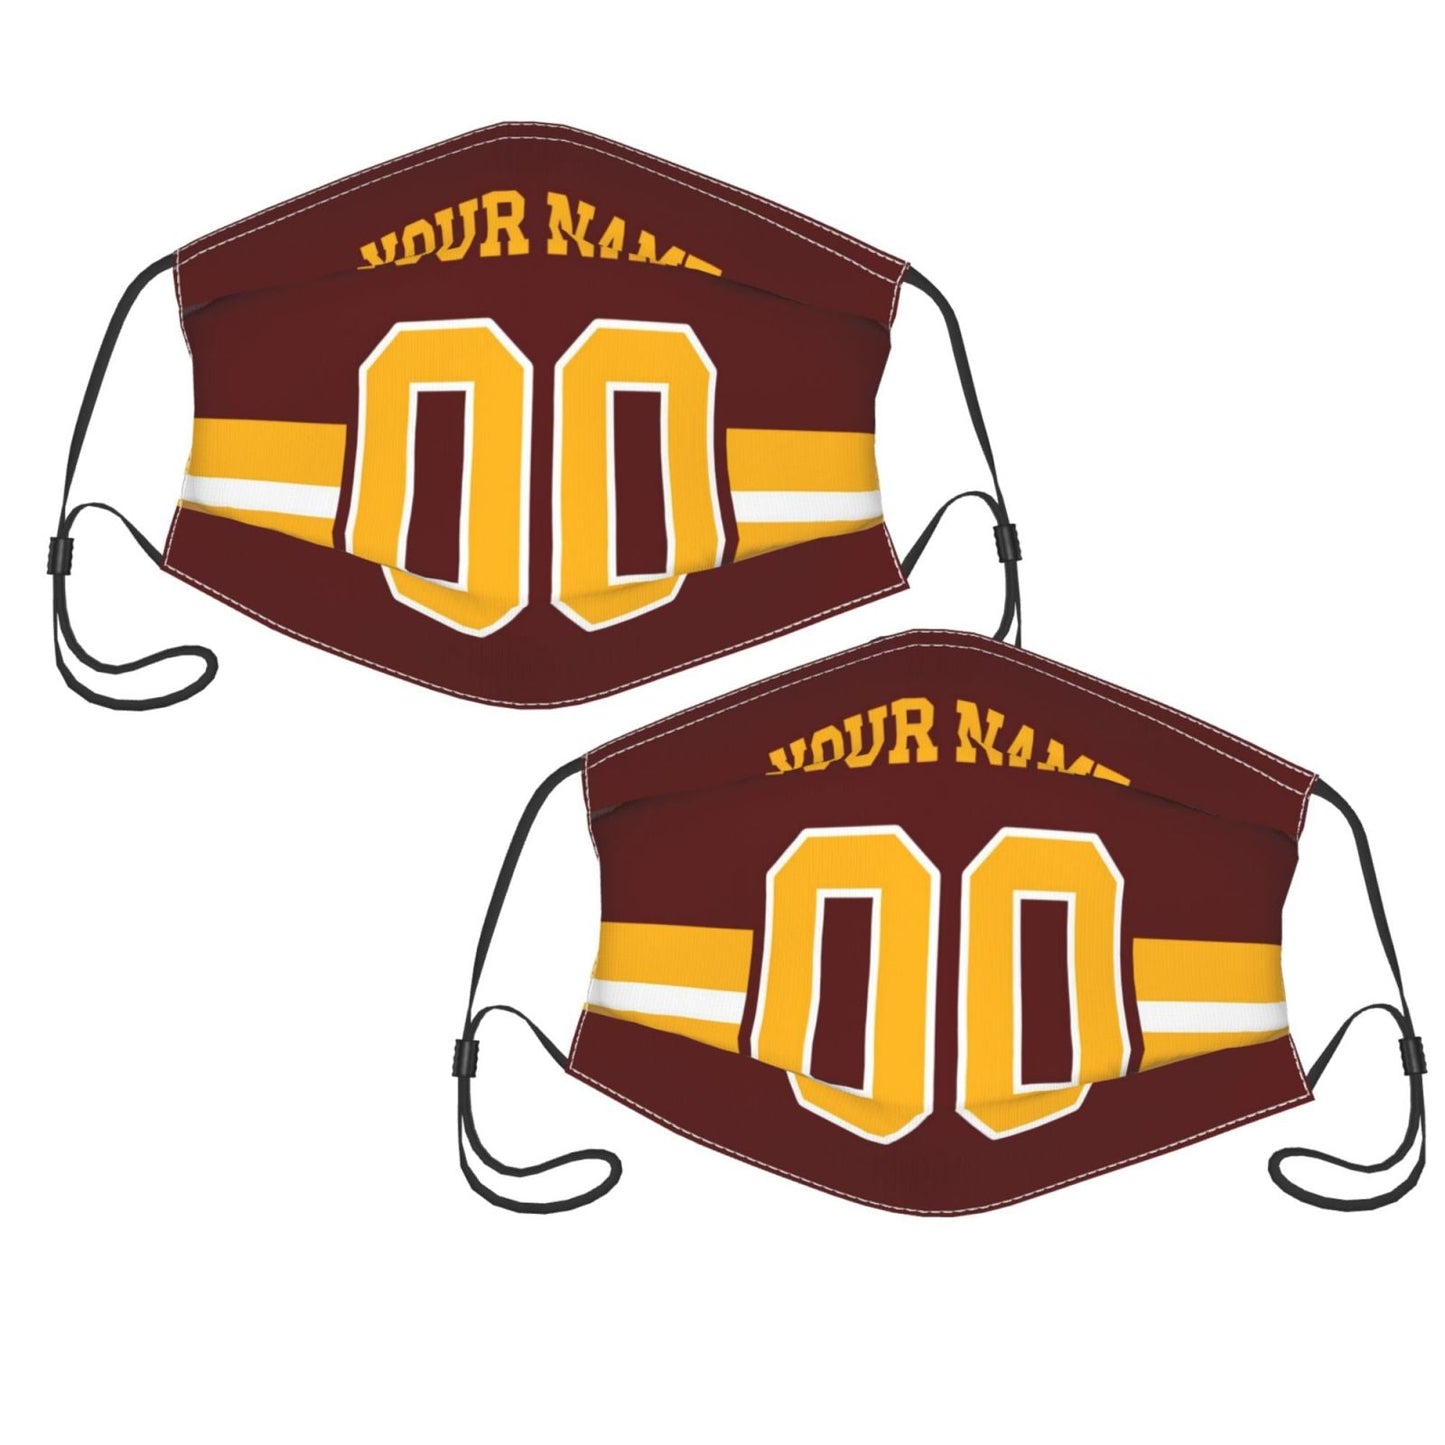 Custom W.Commanders Face Covering Football Team Decorative Adult Face Mask With Filters PM 2.5 Burgundy Gold 2-Pack